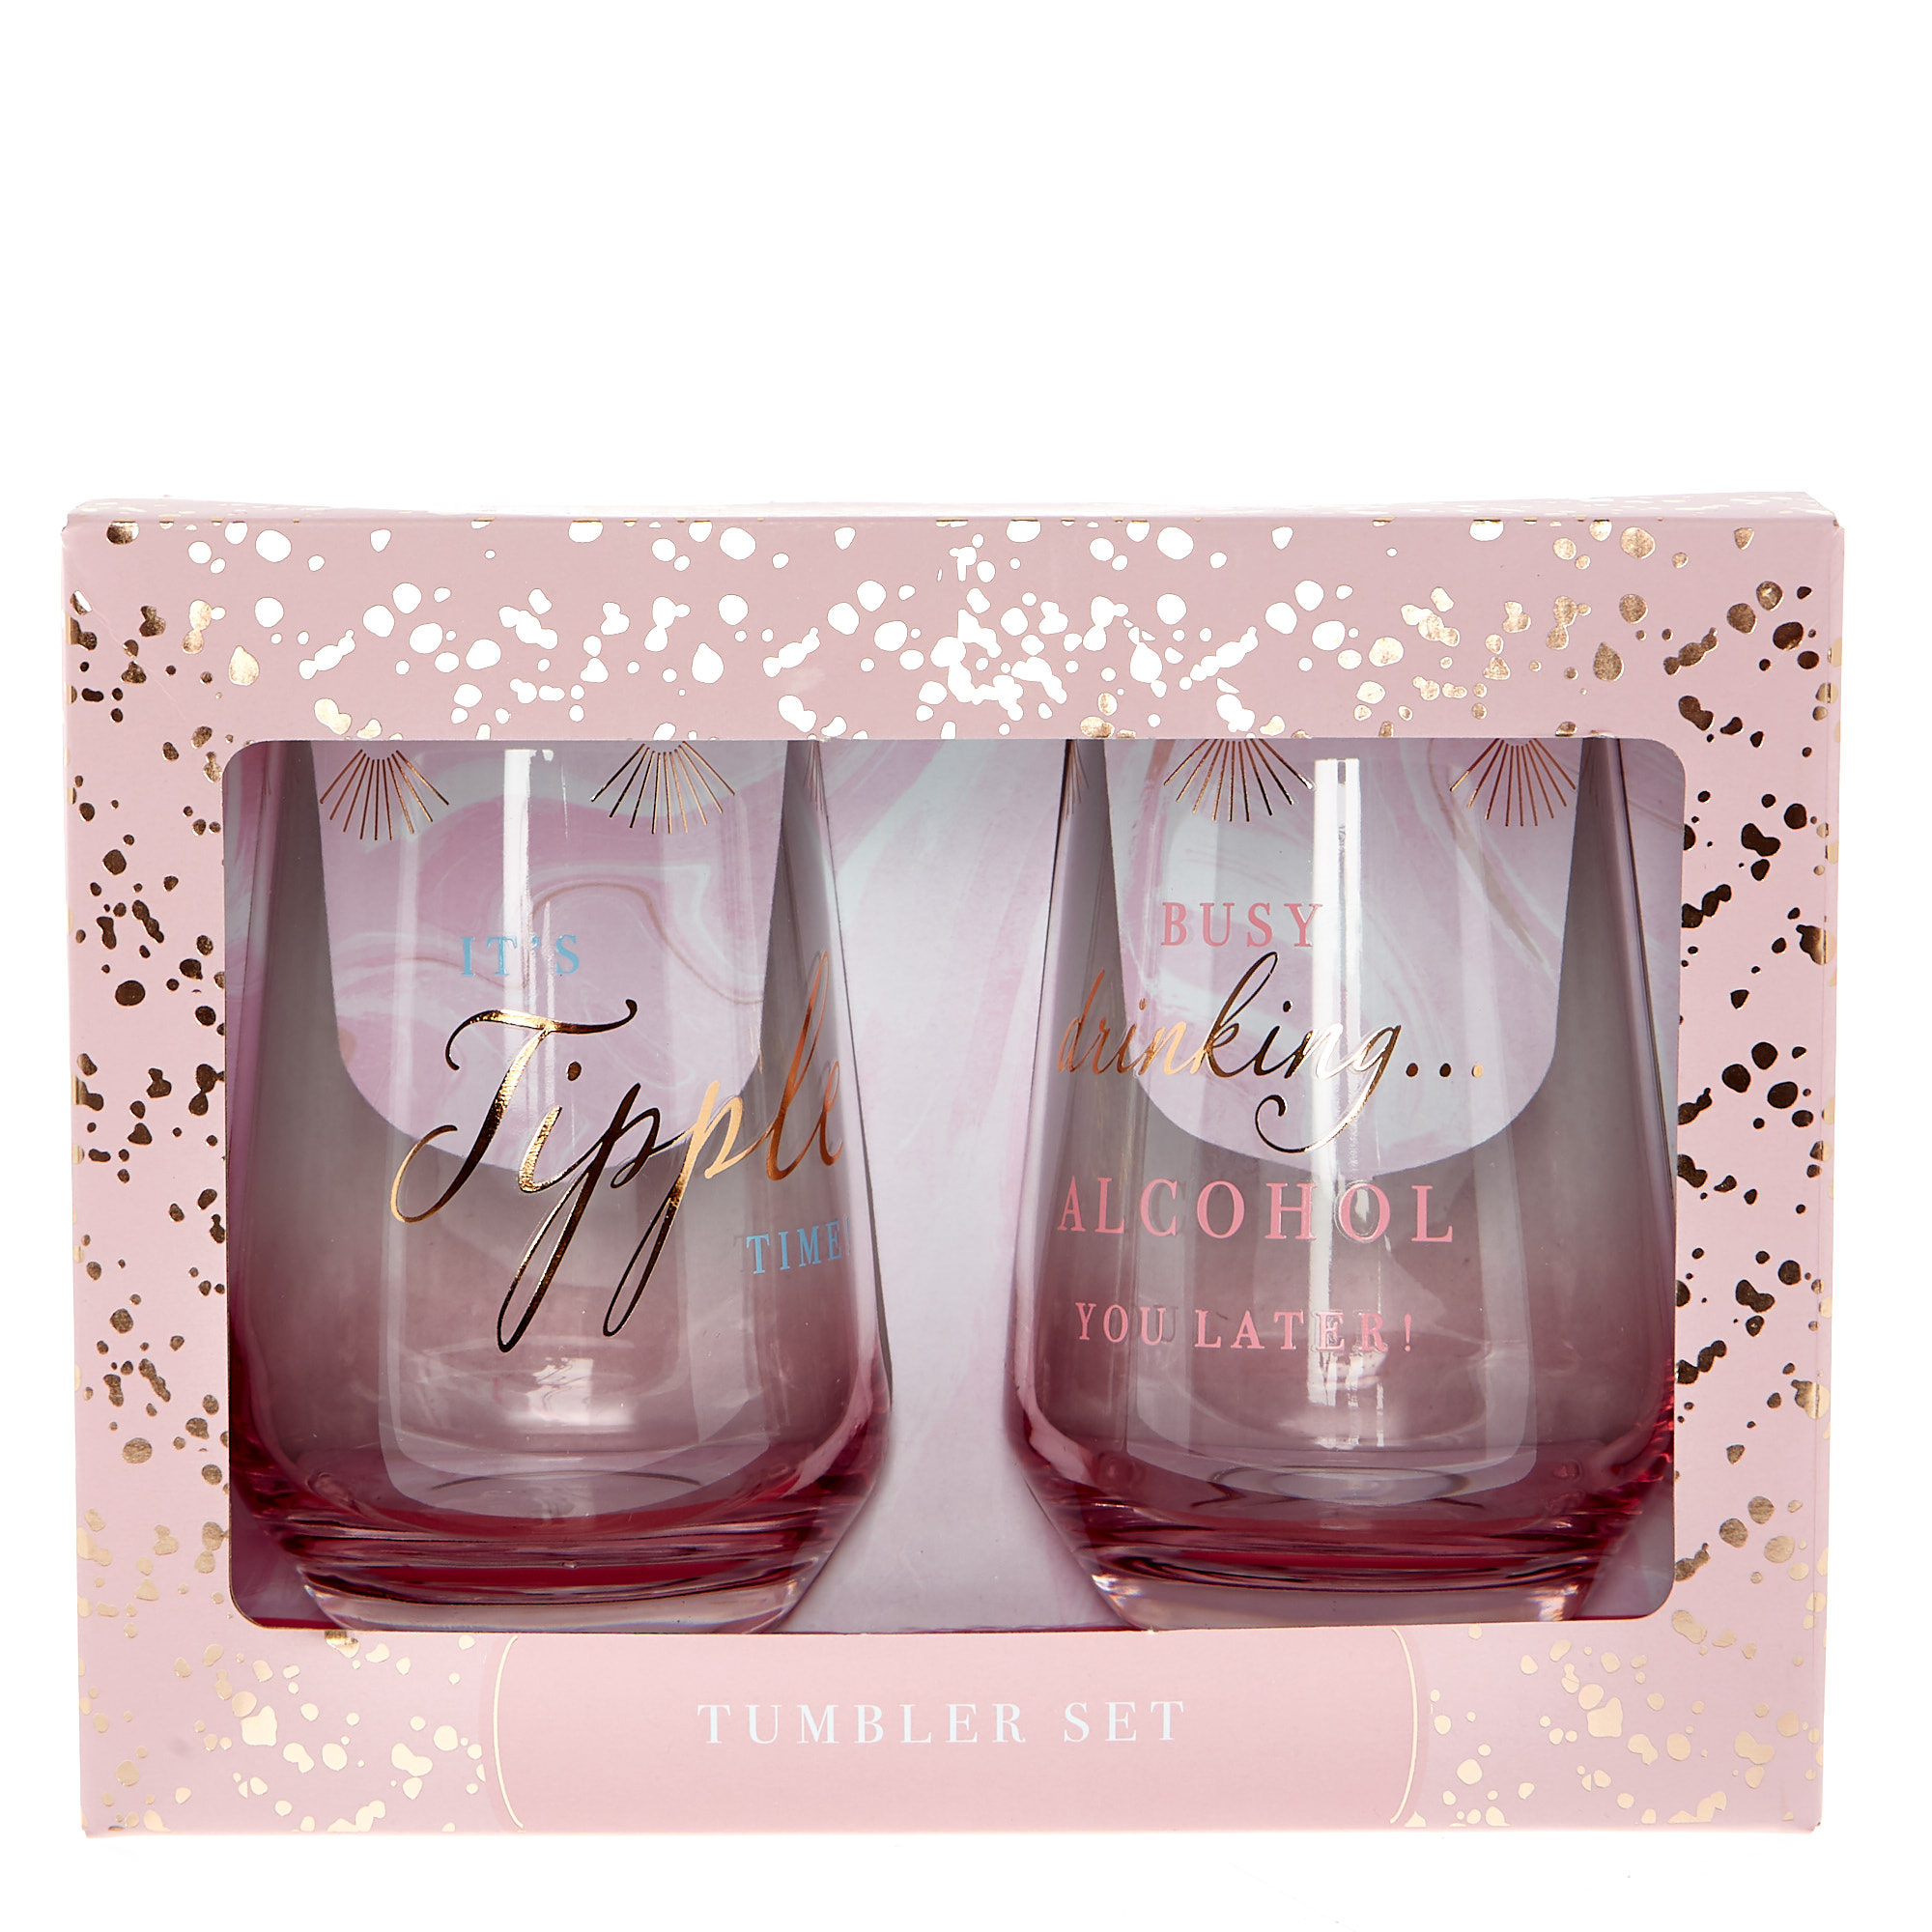 It's Tipple Time Alcohol Tumblers - Set of 2